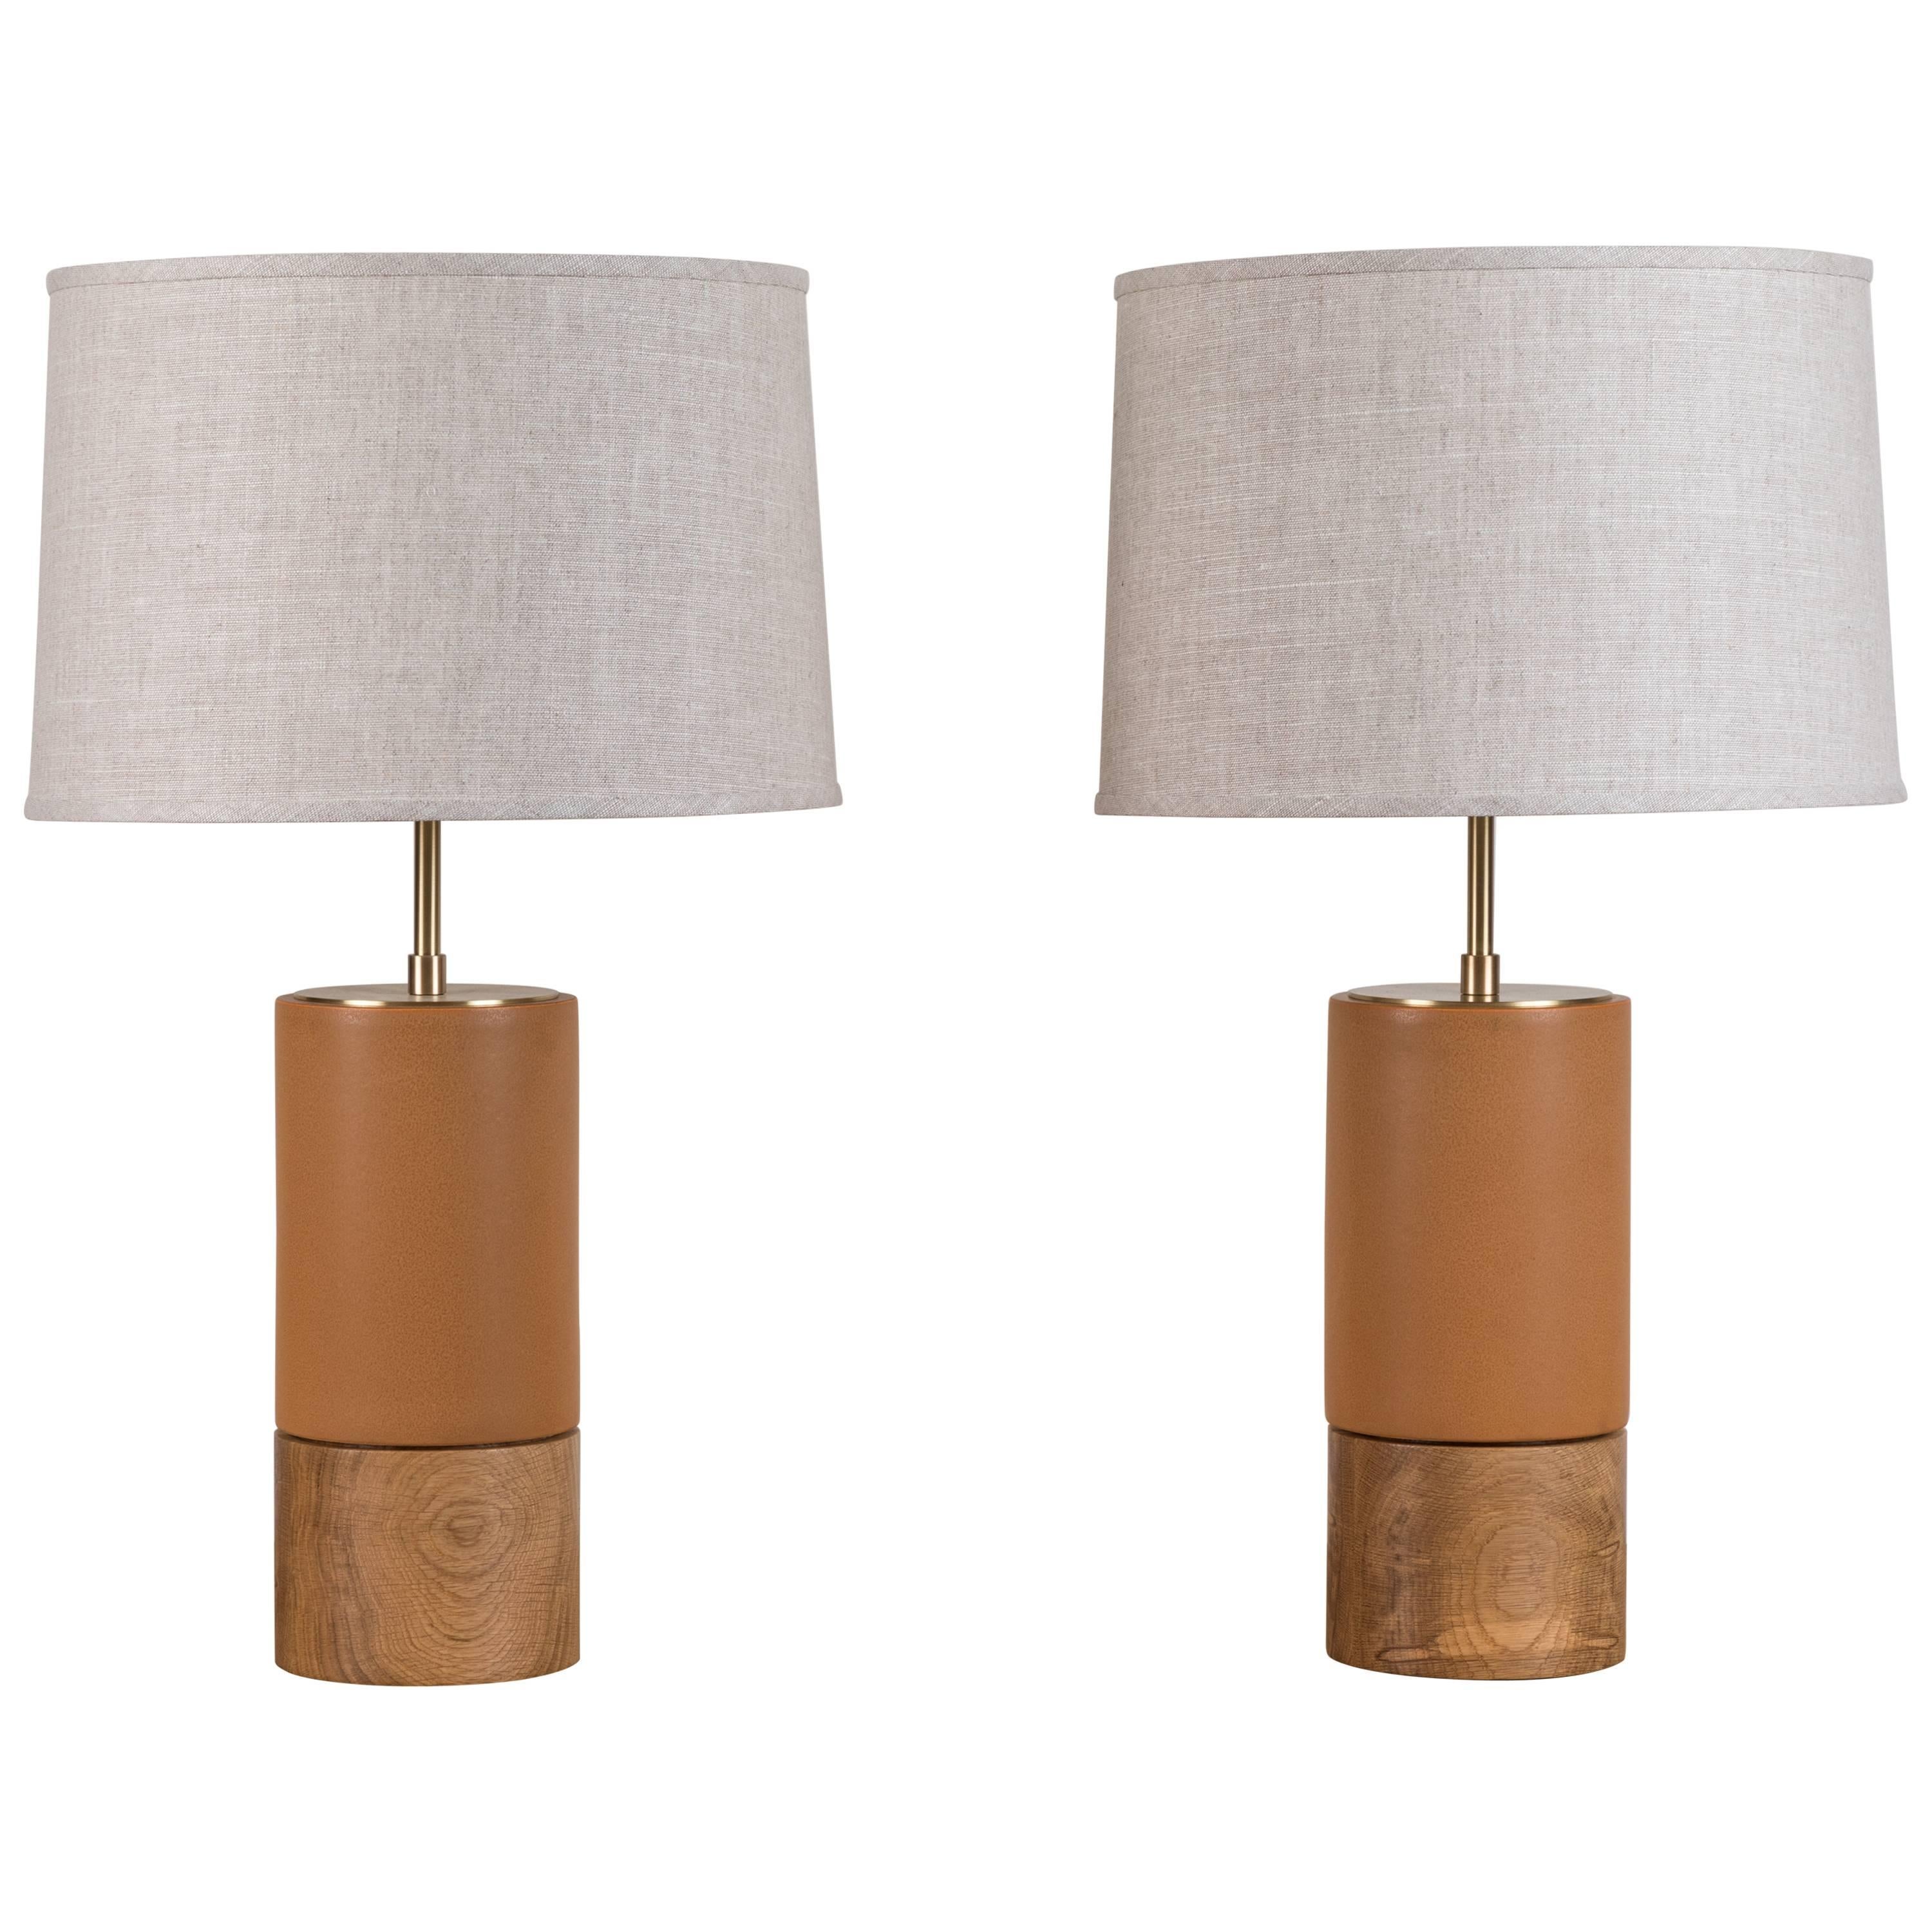 Pair of Short Baxter Lamps by Stone and Sawyer for Lawson-Fenning